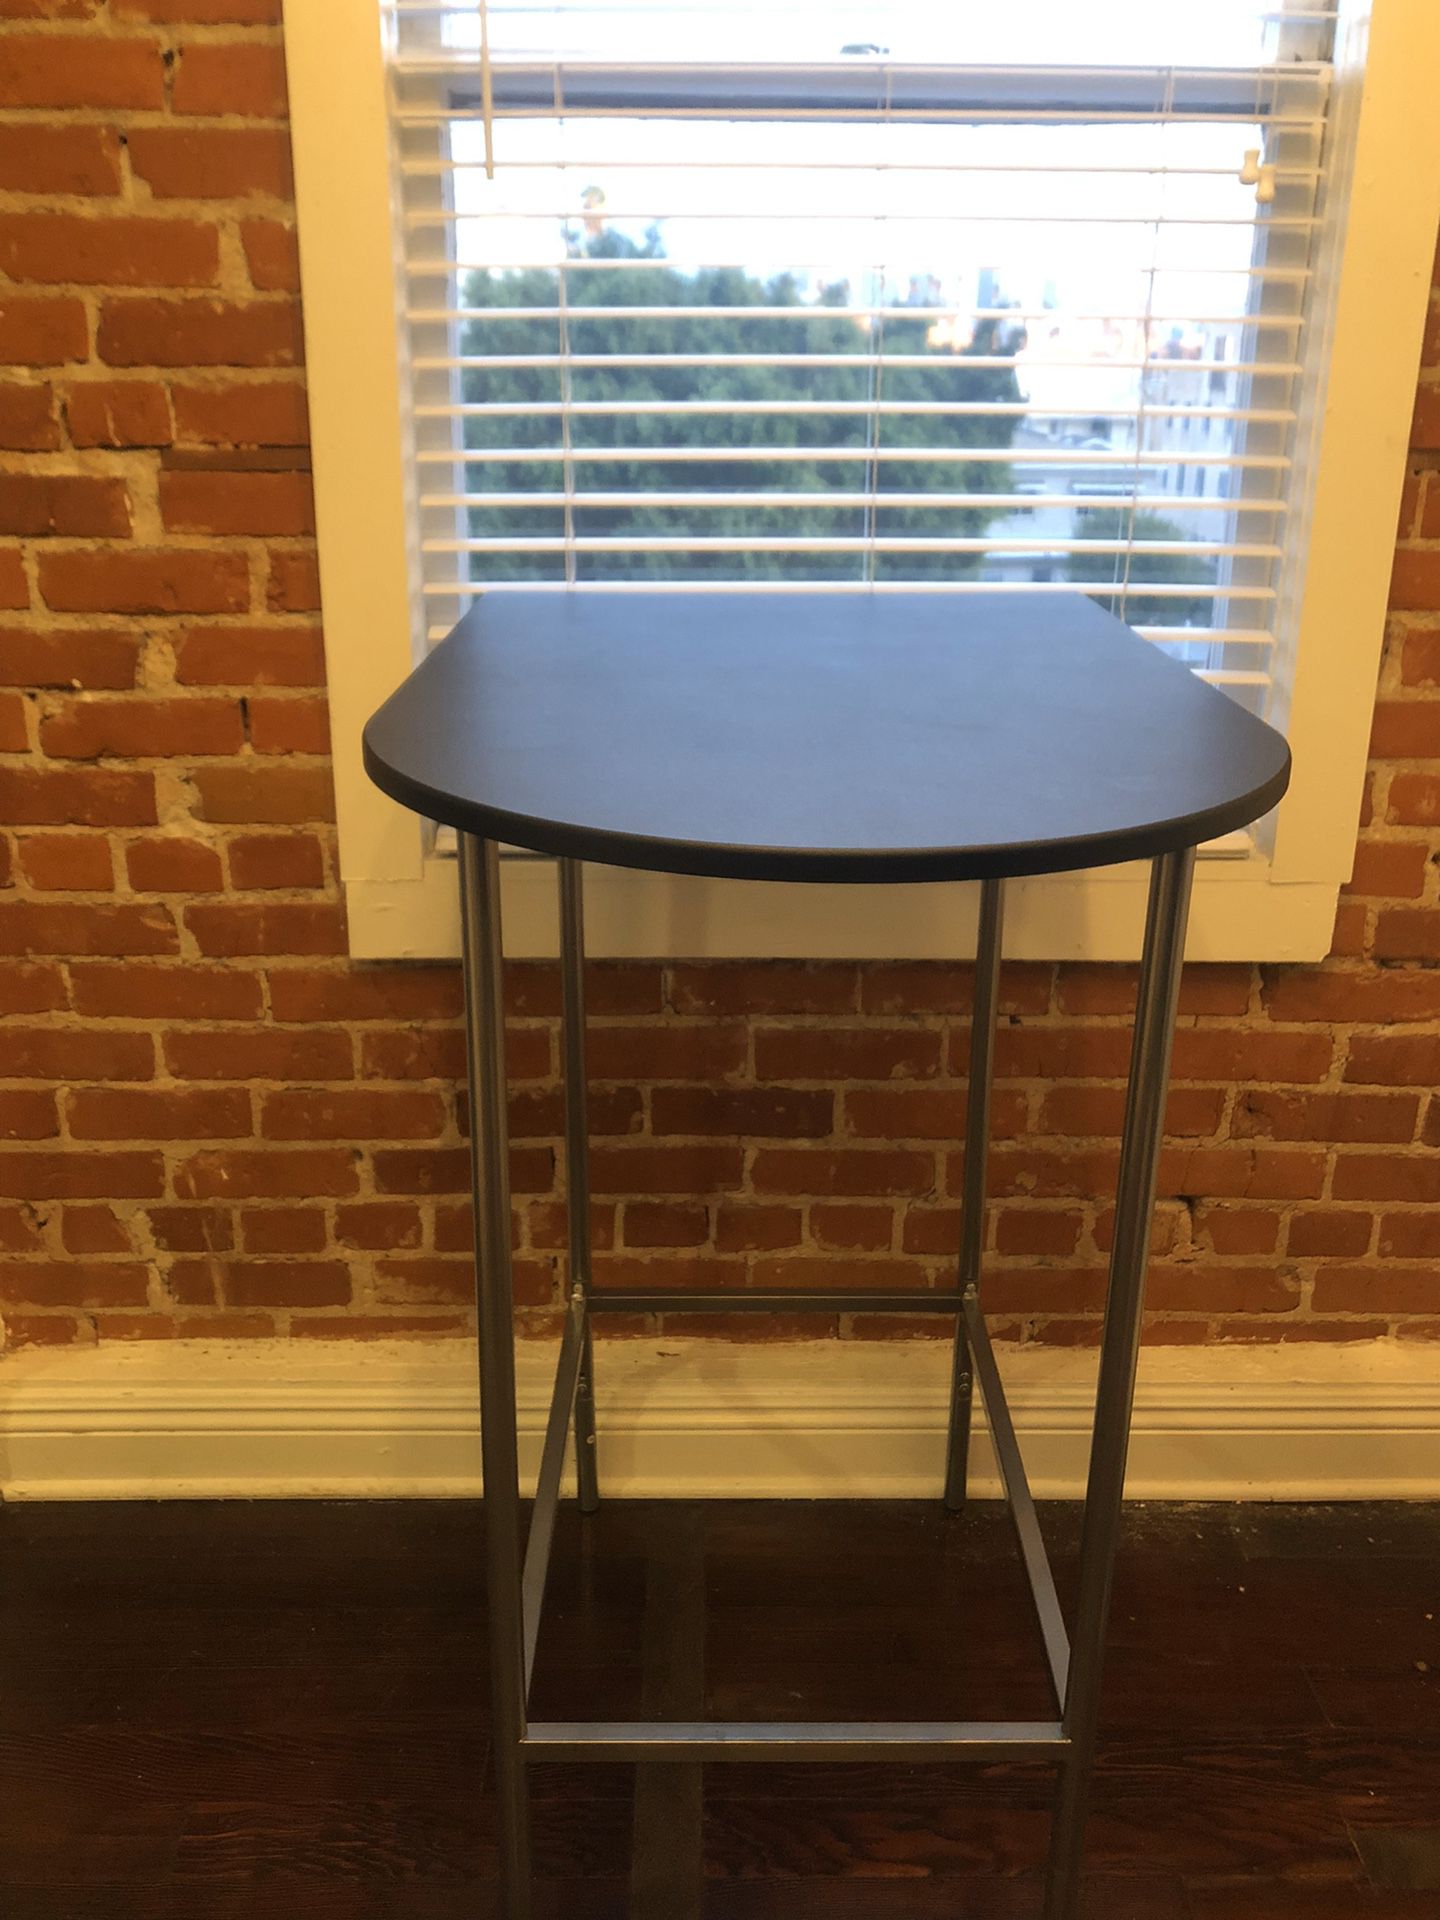 Kitchen Table - perfect for studio apartments!